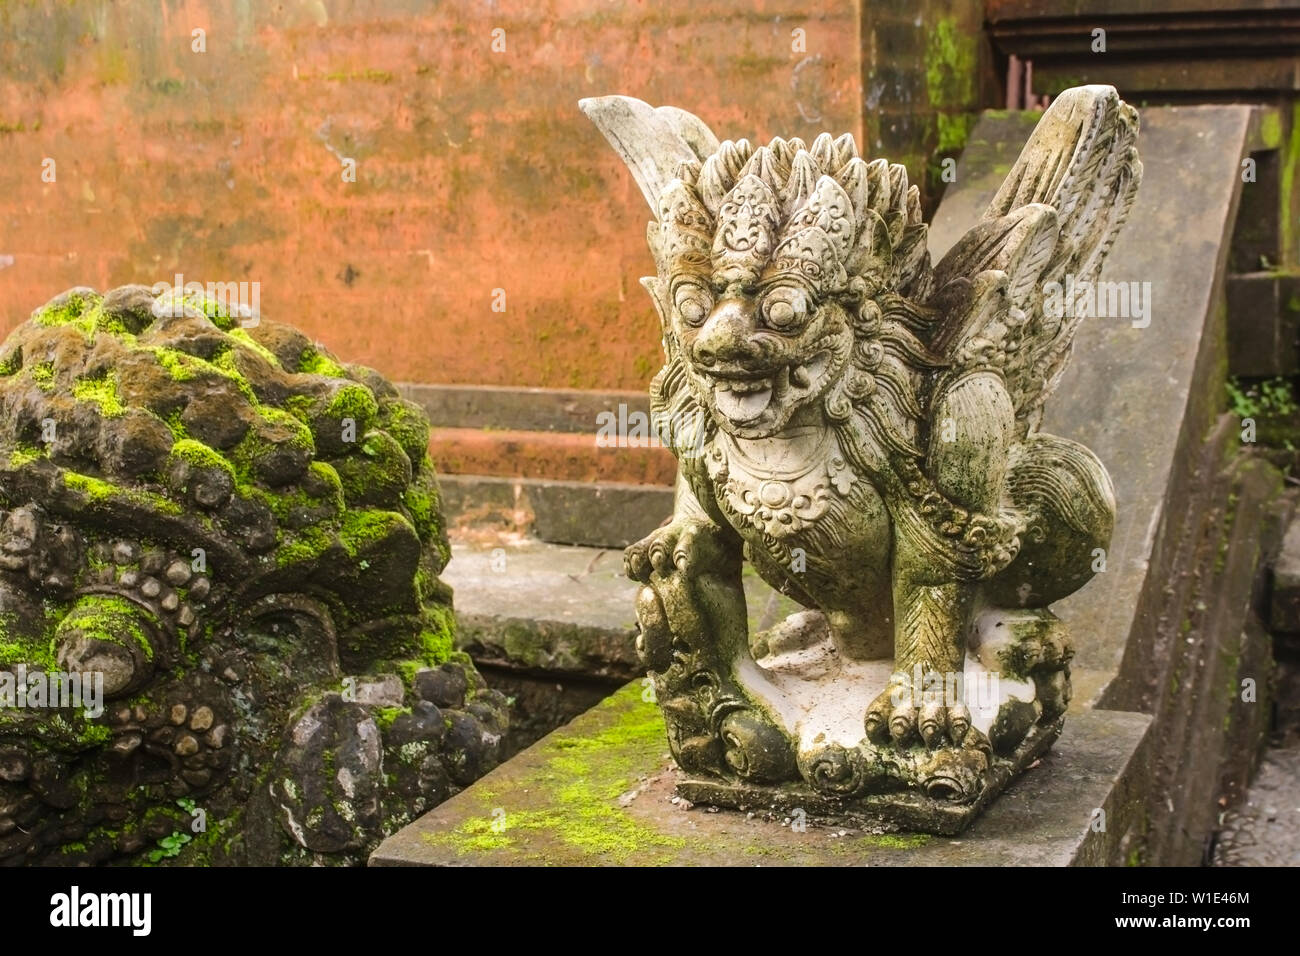 Close up of a mossy gray stone sculpture of Garuda legendary bird at Ubud Palace. Carved in traditional Balinese style. Stock Photo